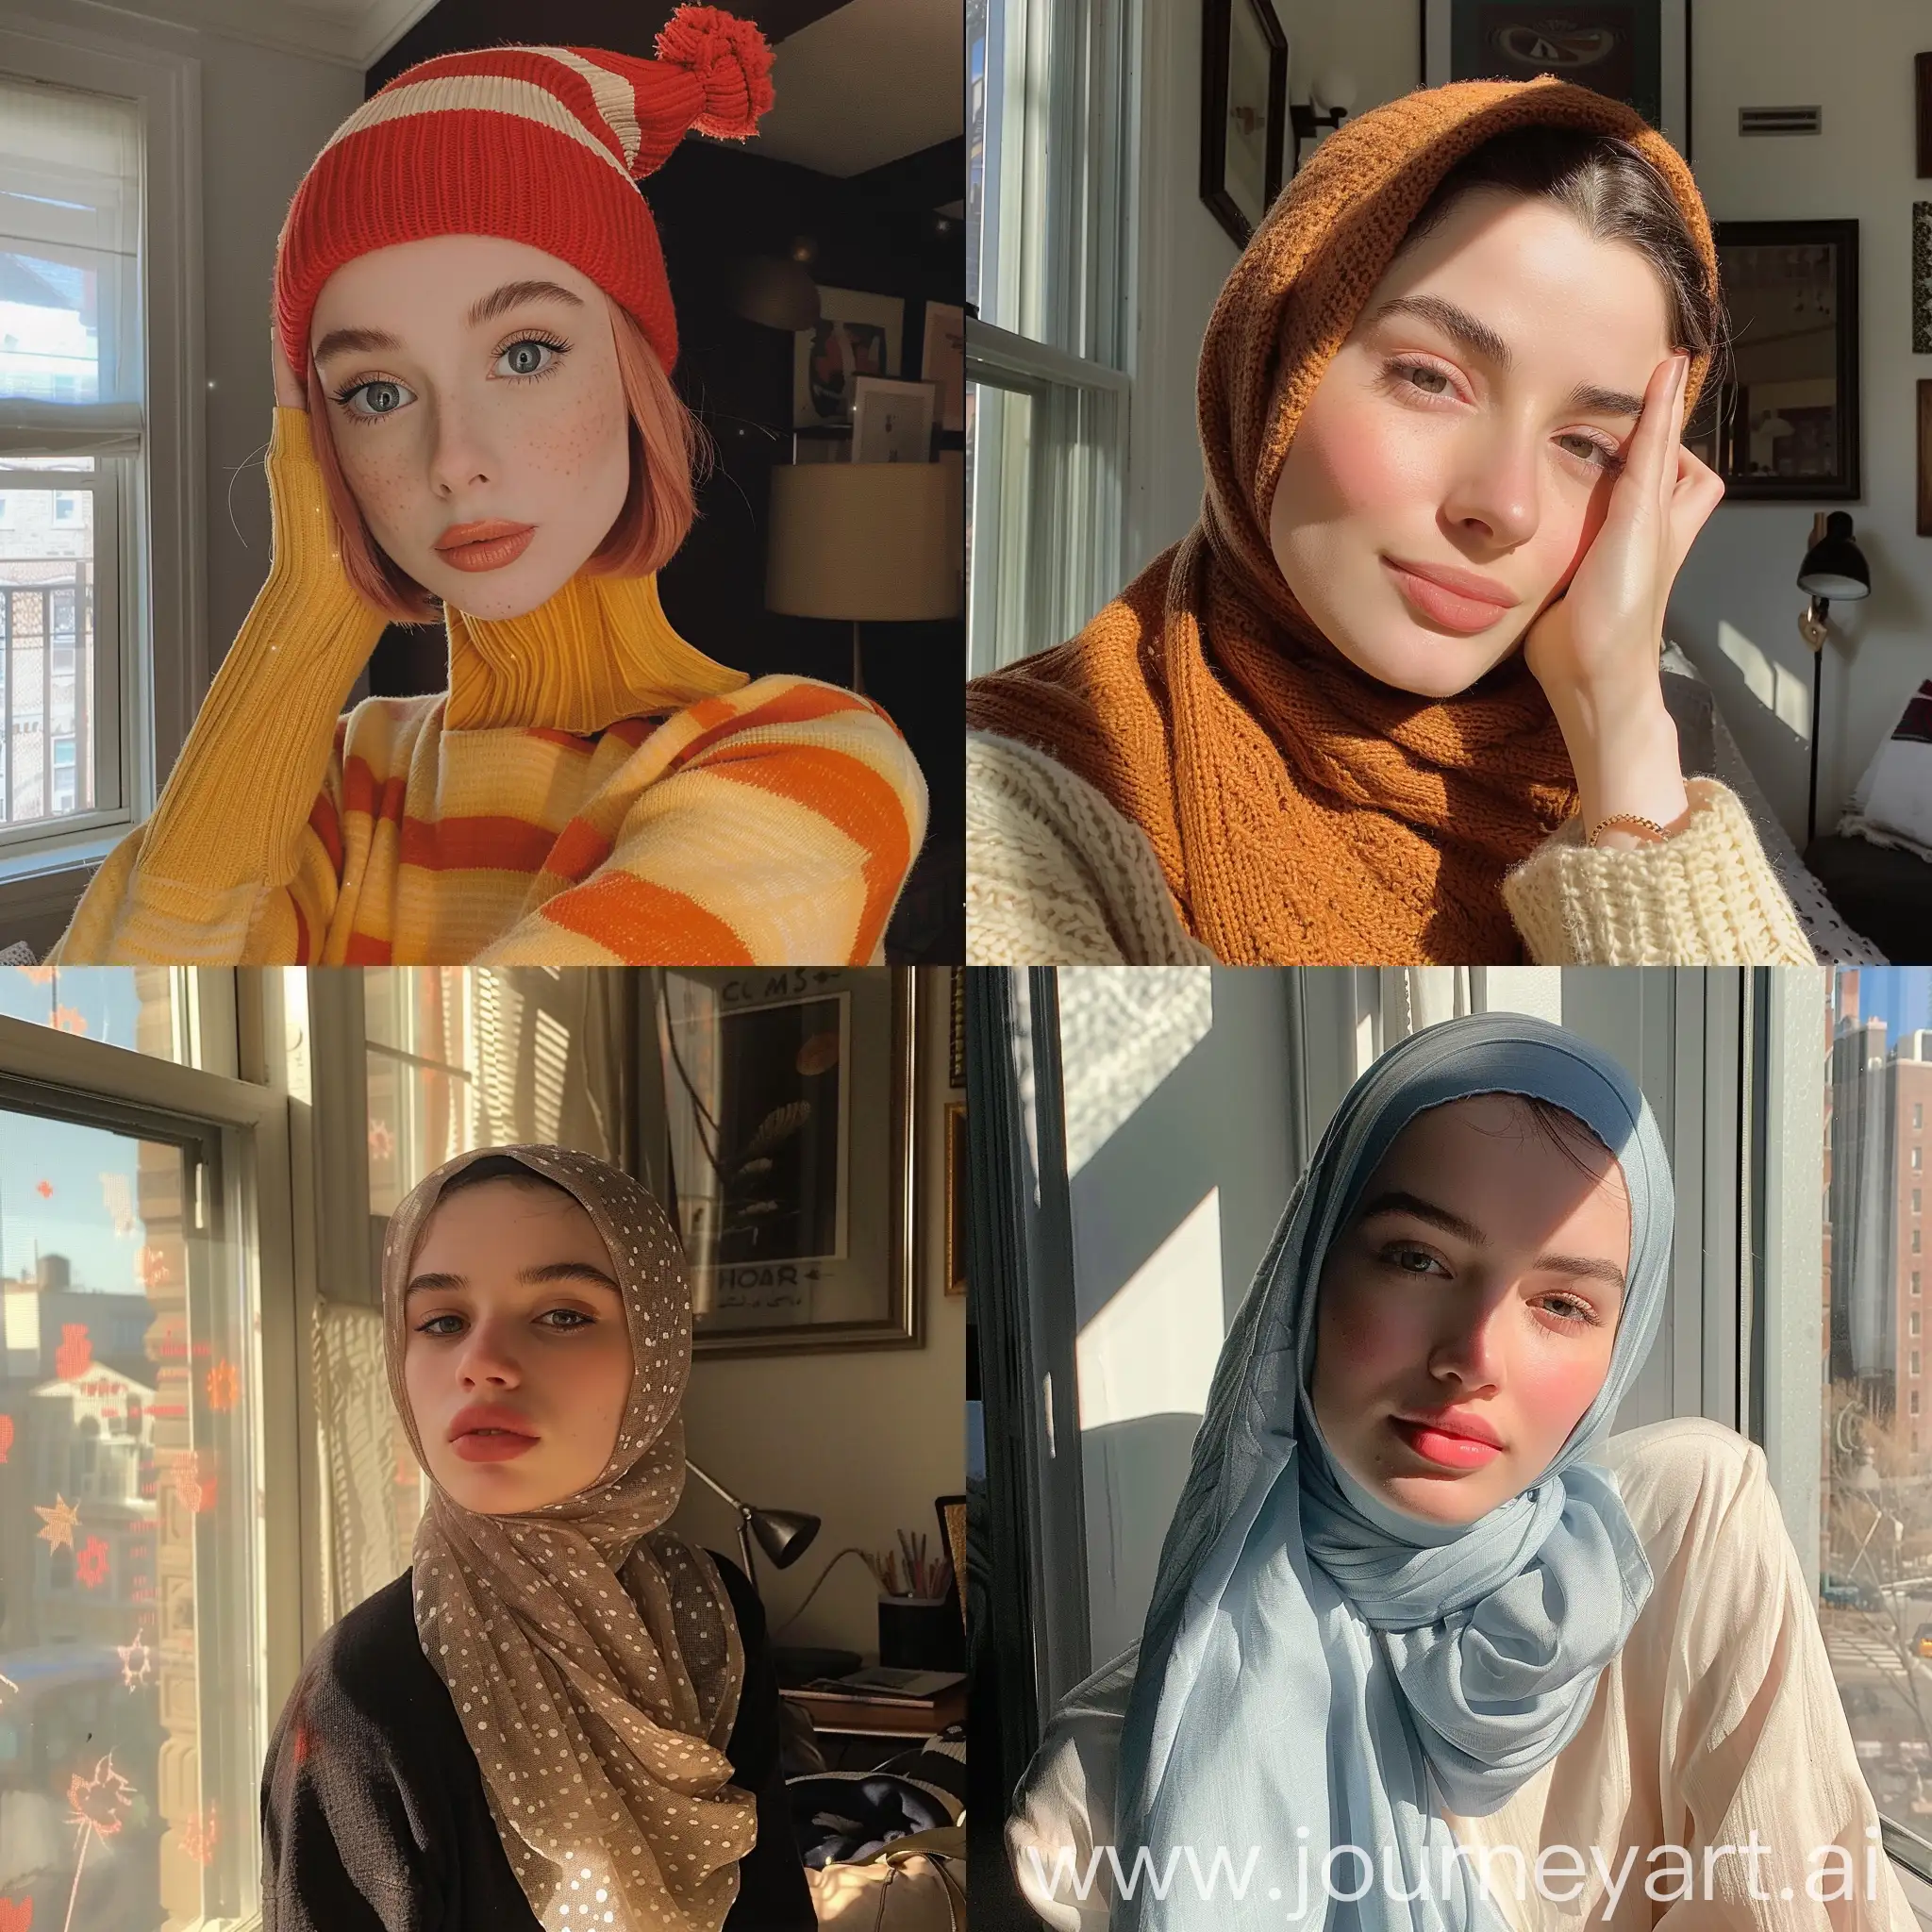 Adorable-Girl-in-Hijab-Selfie-in-NYC-Apartment